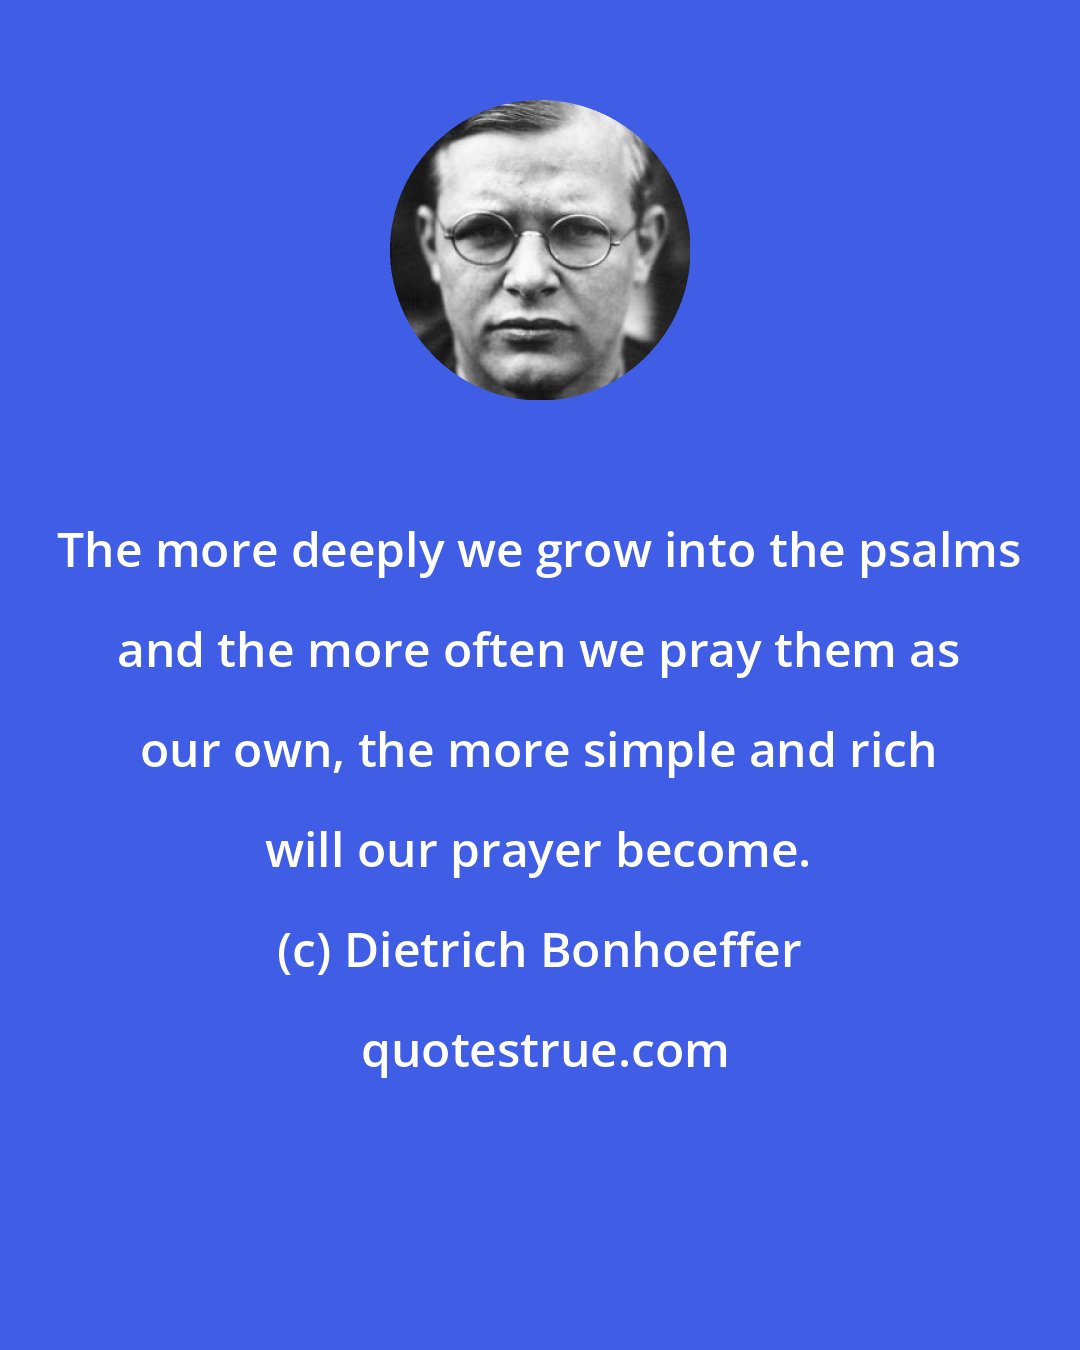 Dietrich Bonhoeffer: The more deeply we grow into the psalms and the more often we pray them as our own, the more simple and rich will our prayer become.